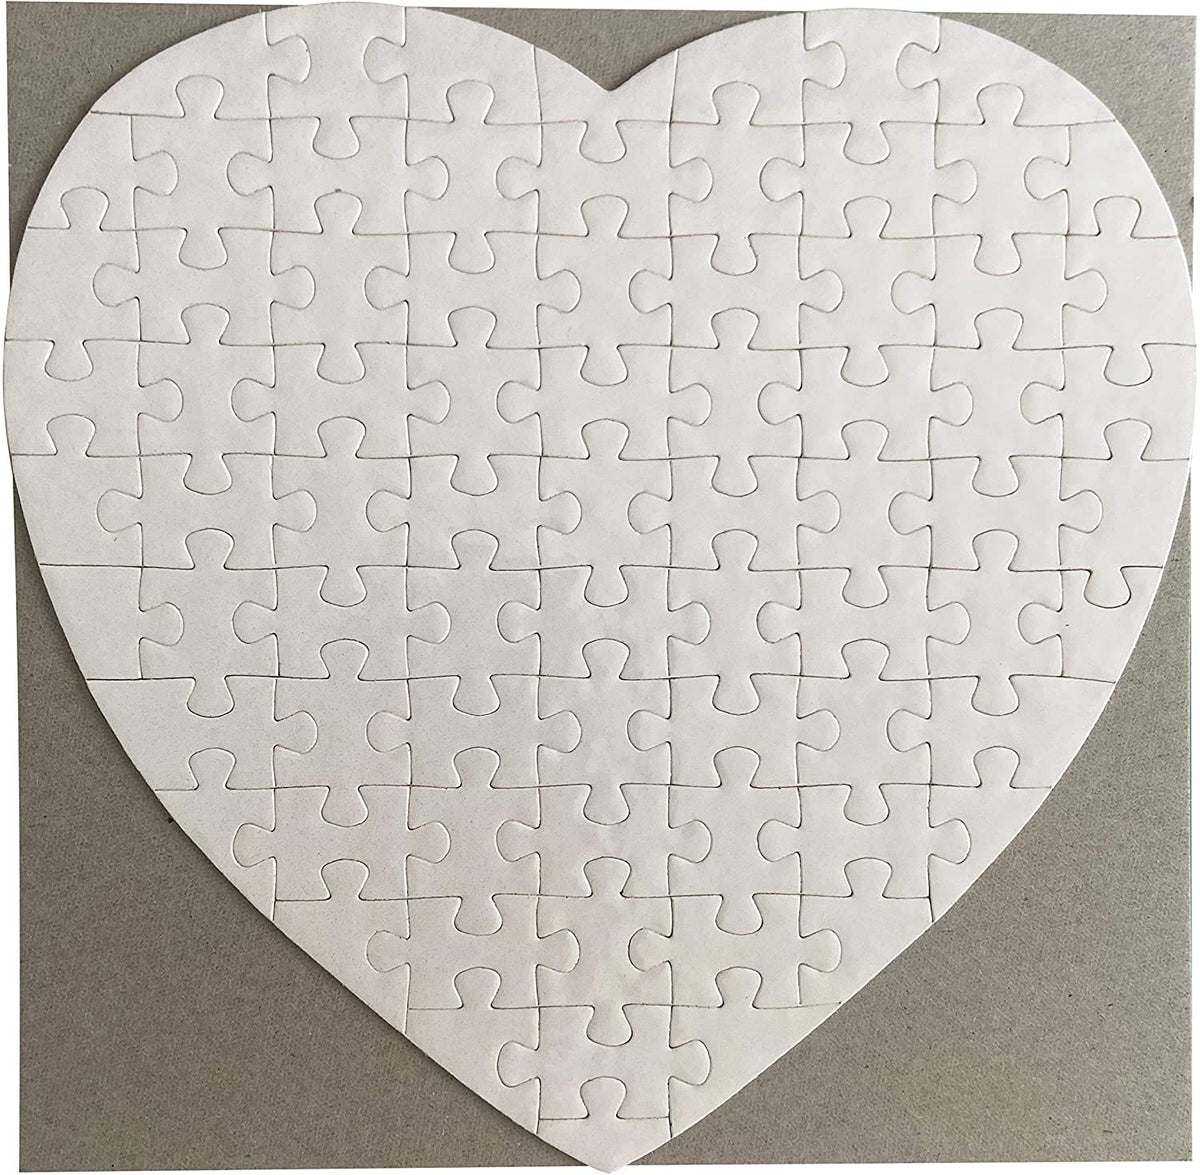 Blank Sublimation Blanks Puzzles Heart White Jigsaw Puzzle - Temu